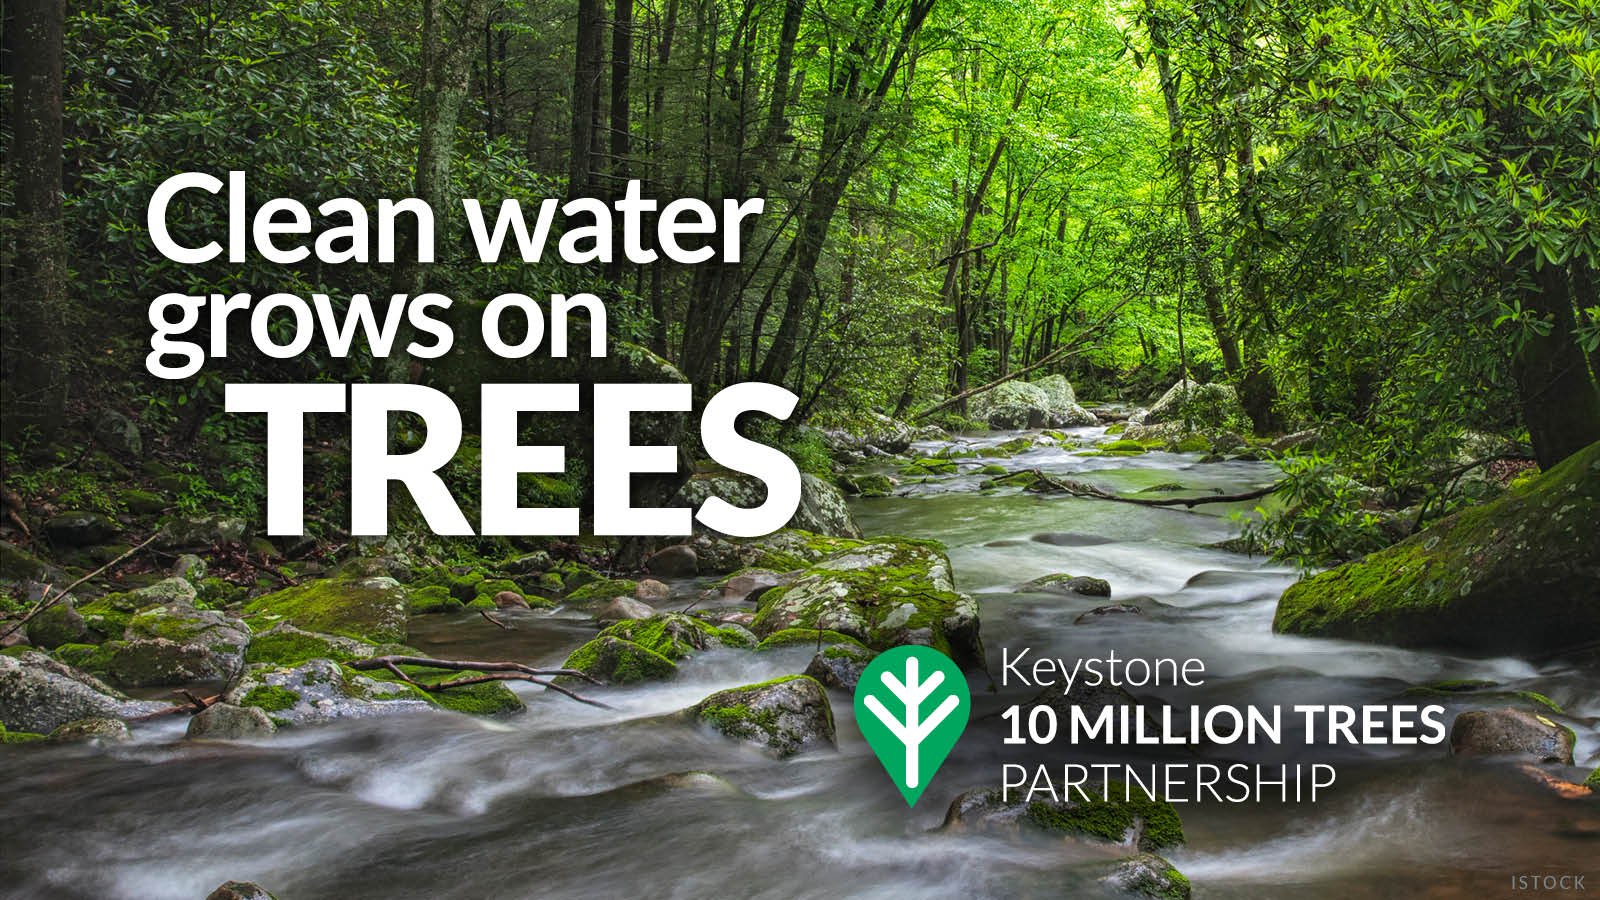 Clean Water grows on trees